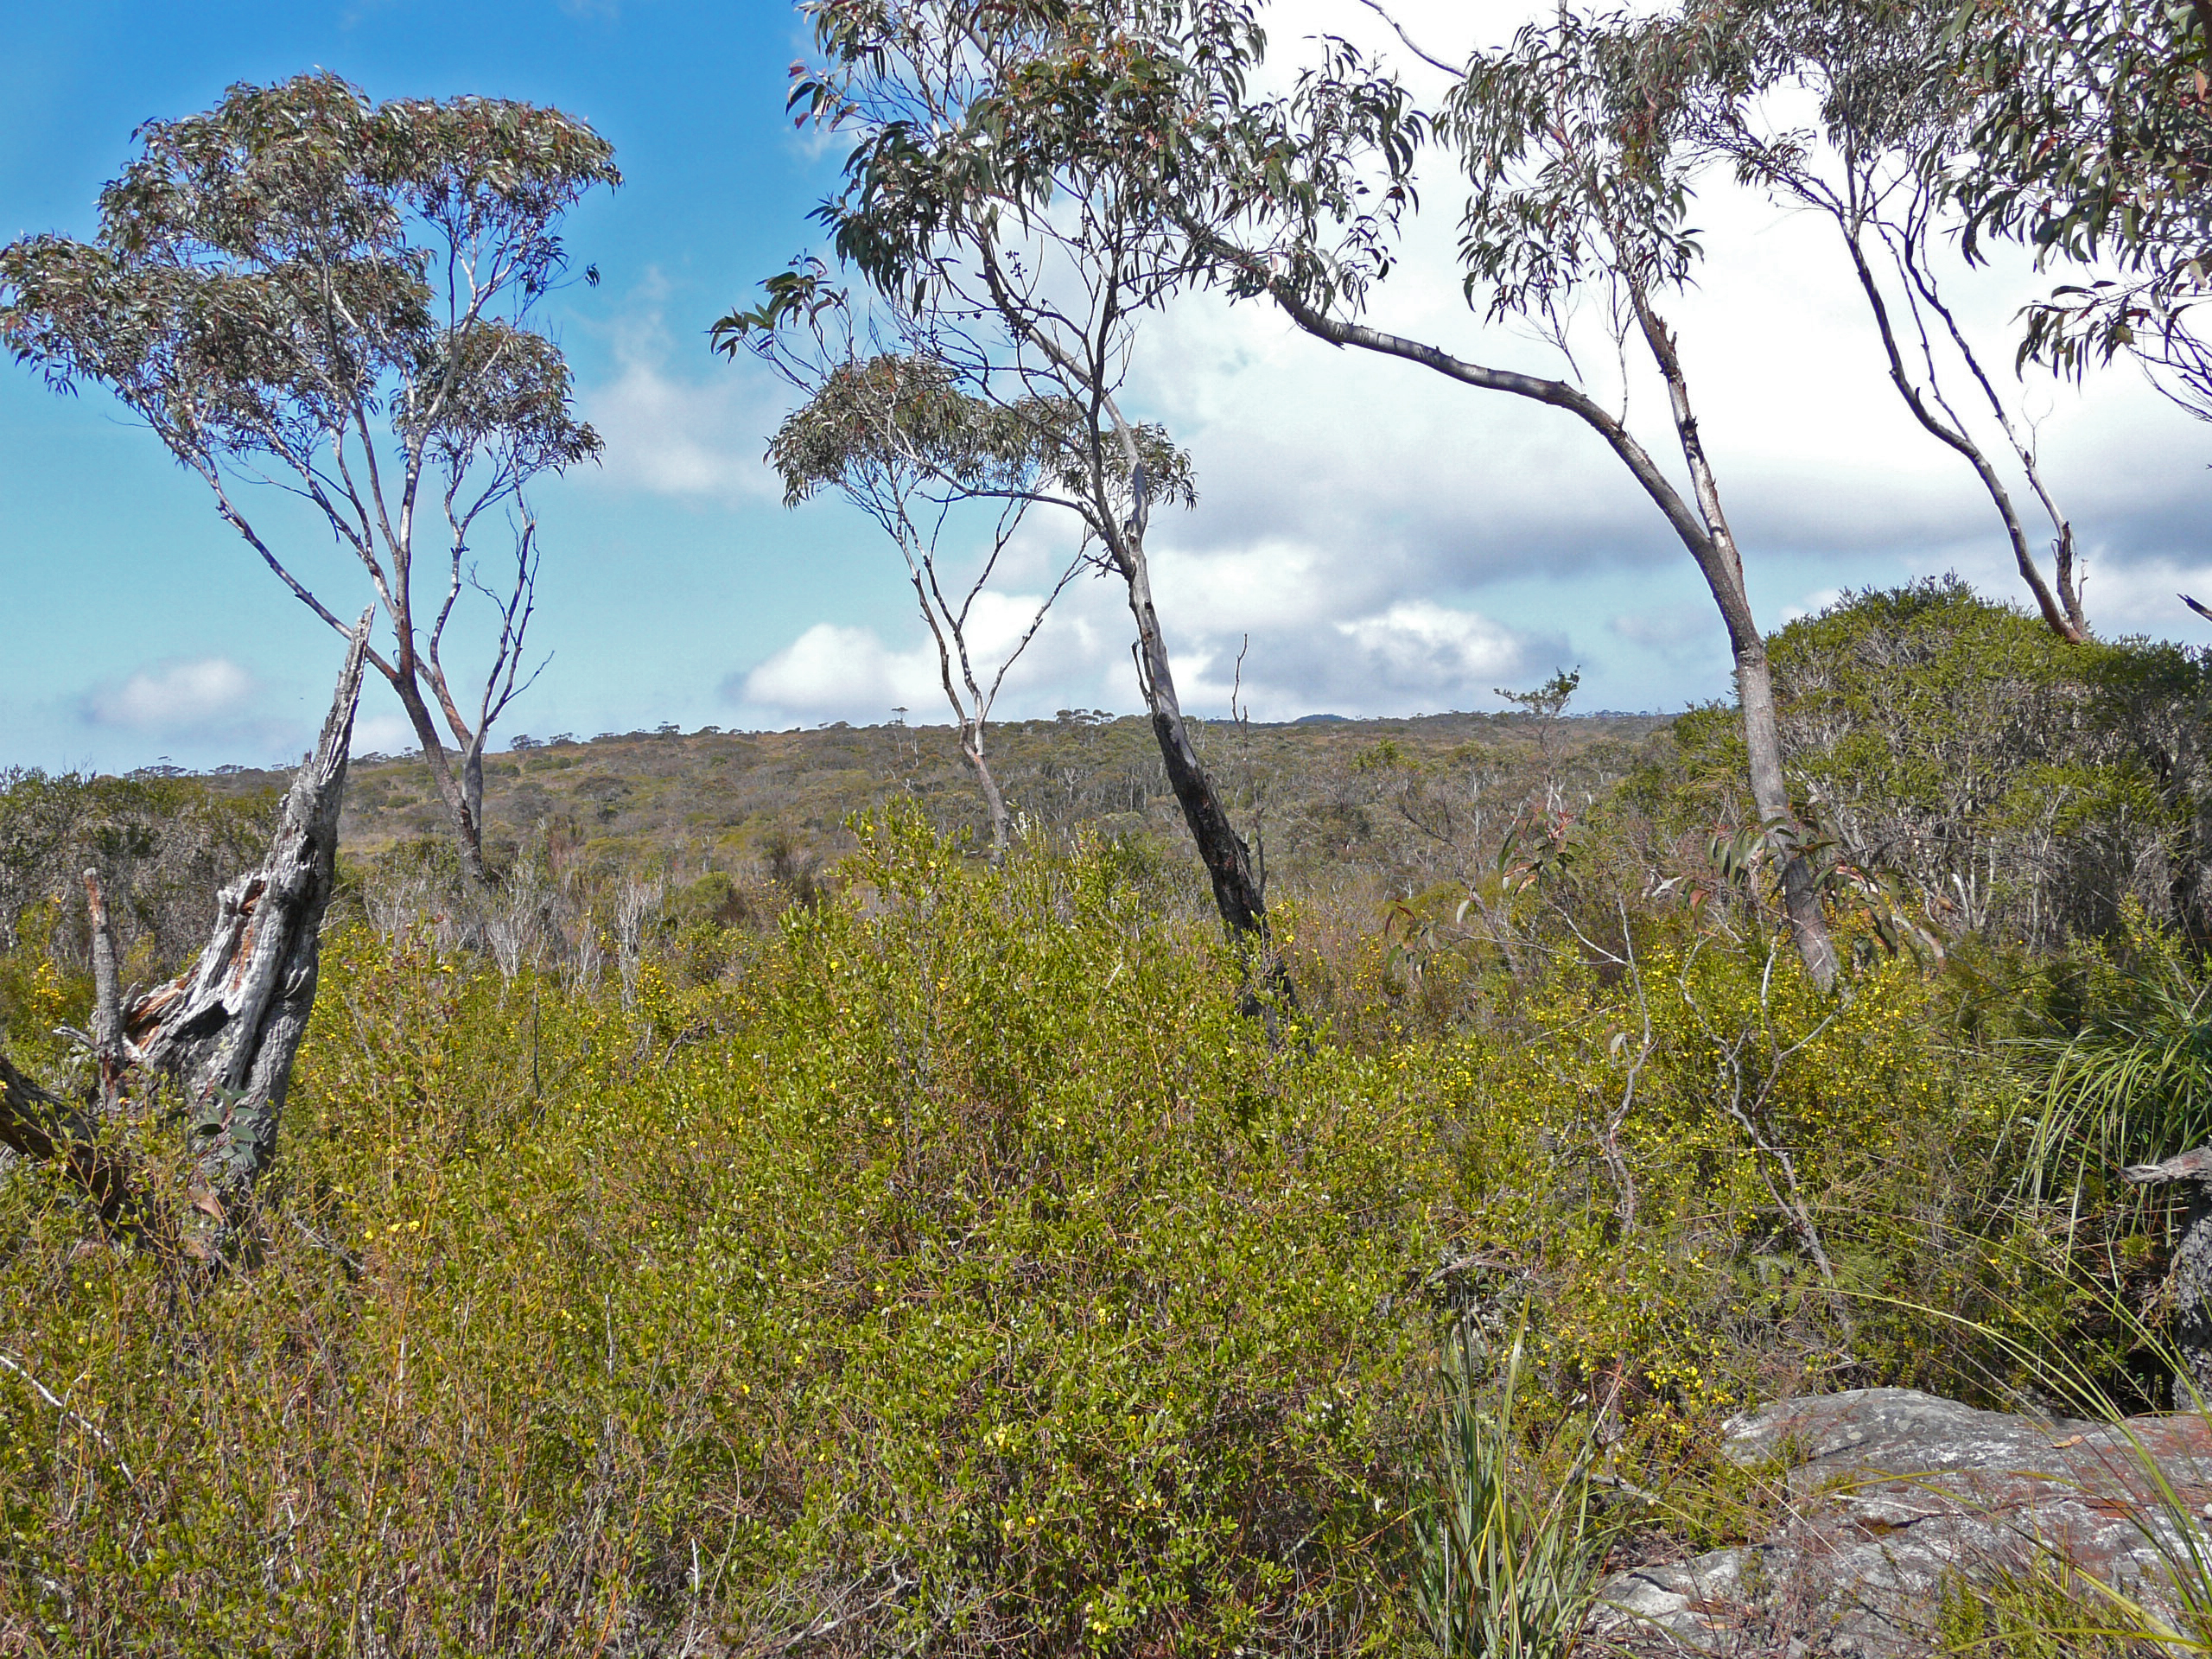 Barren Grounds Nature Reserve near Primbee, NSW, New South Wales, Australia